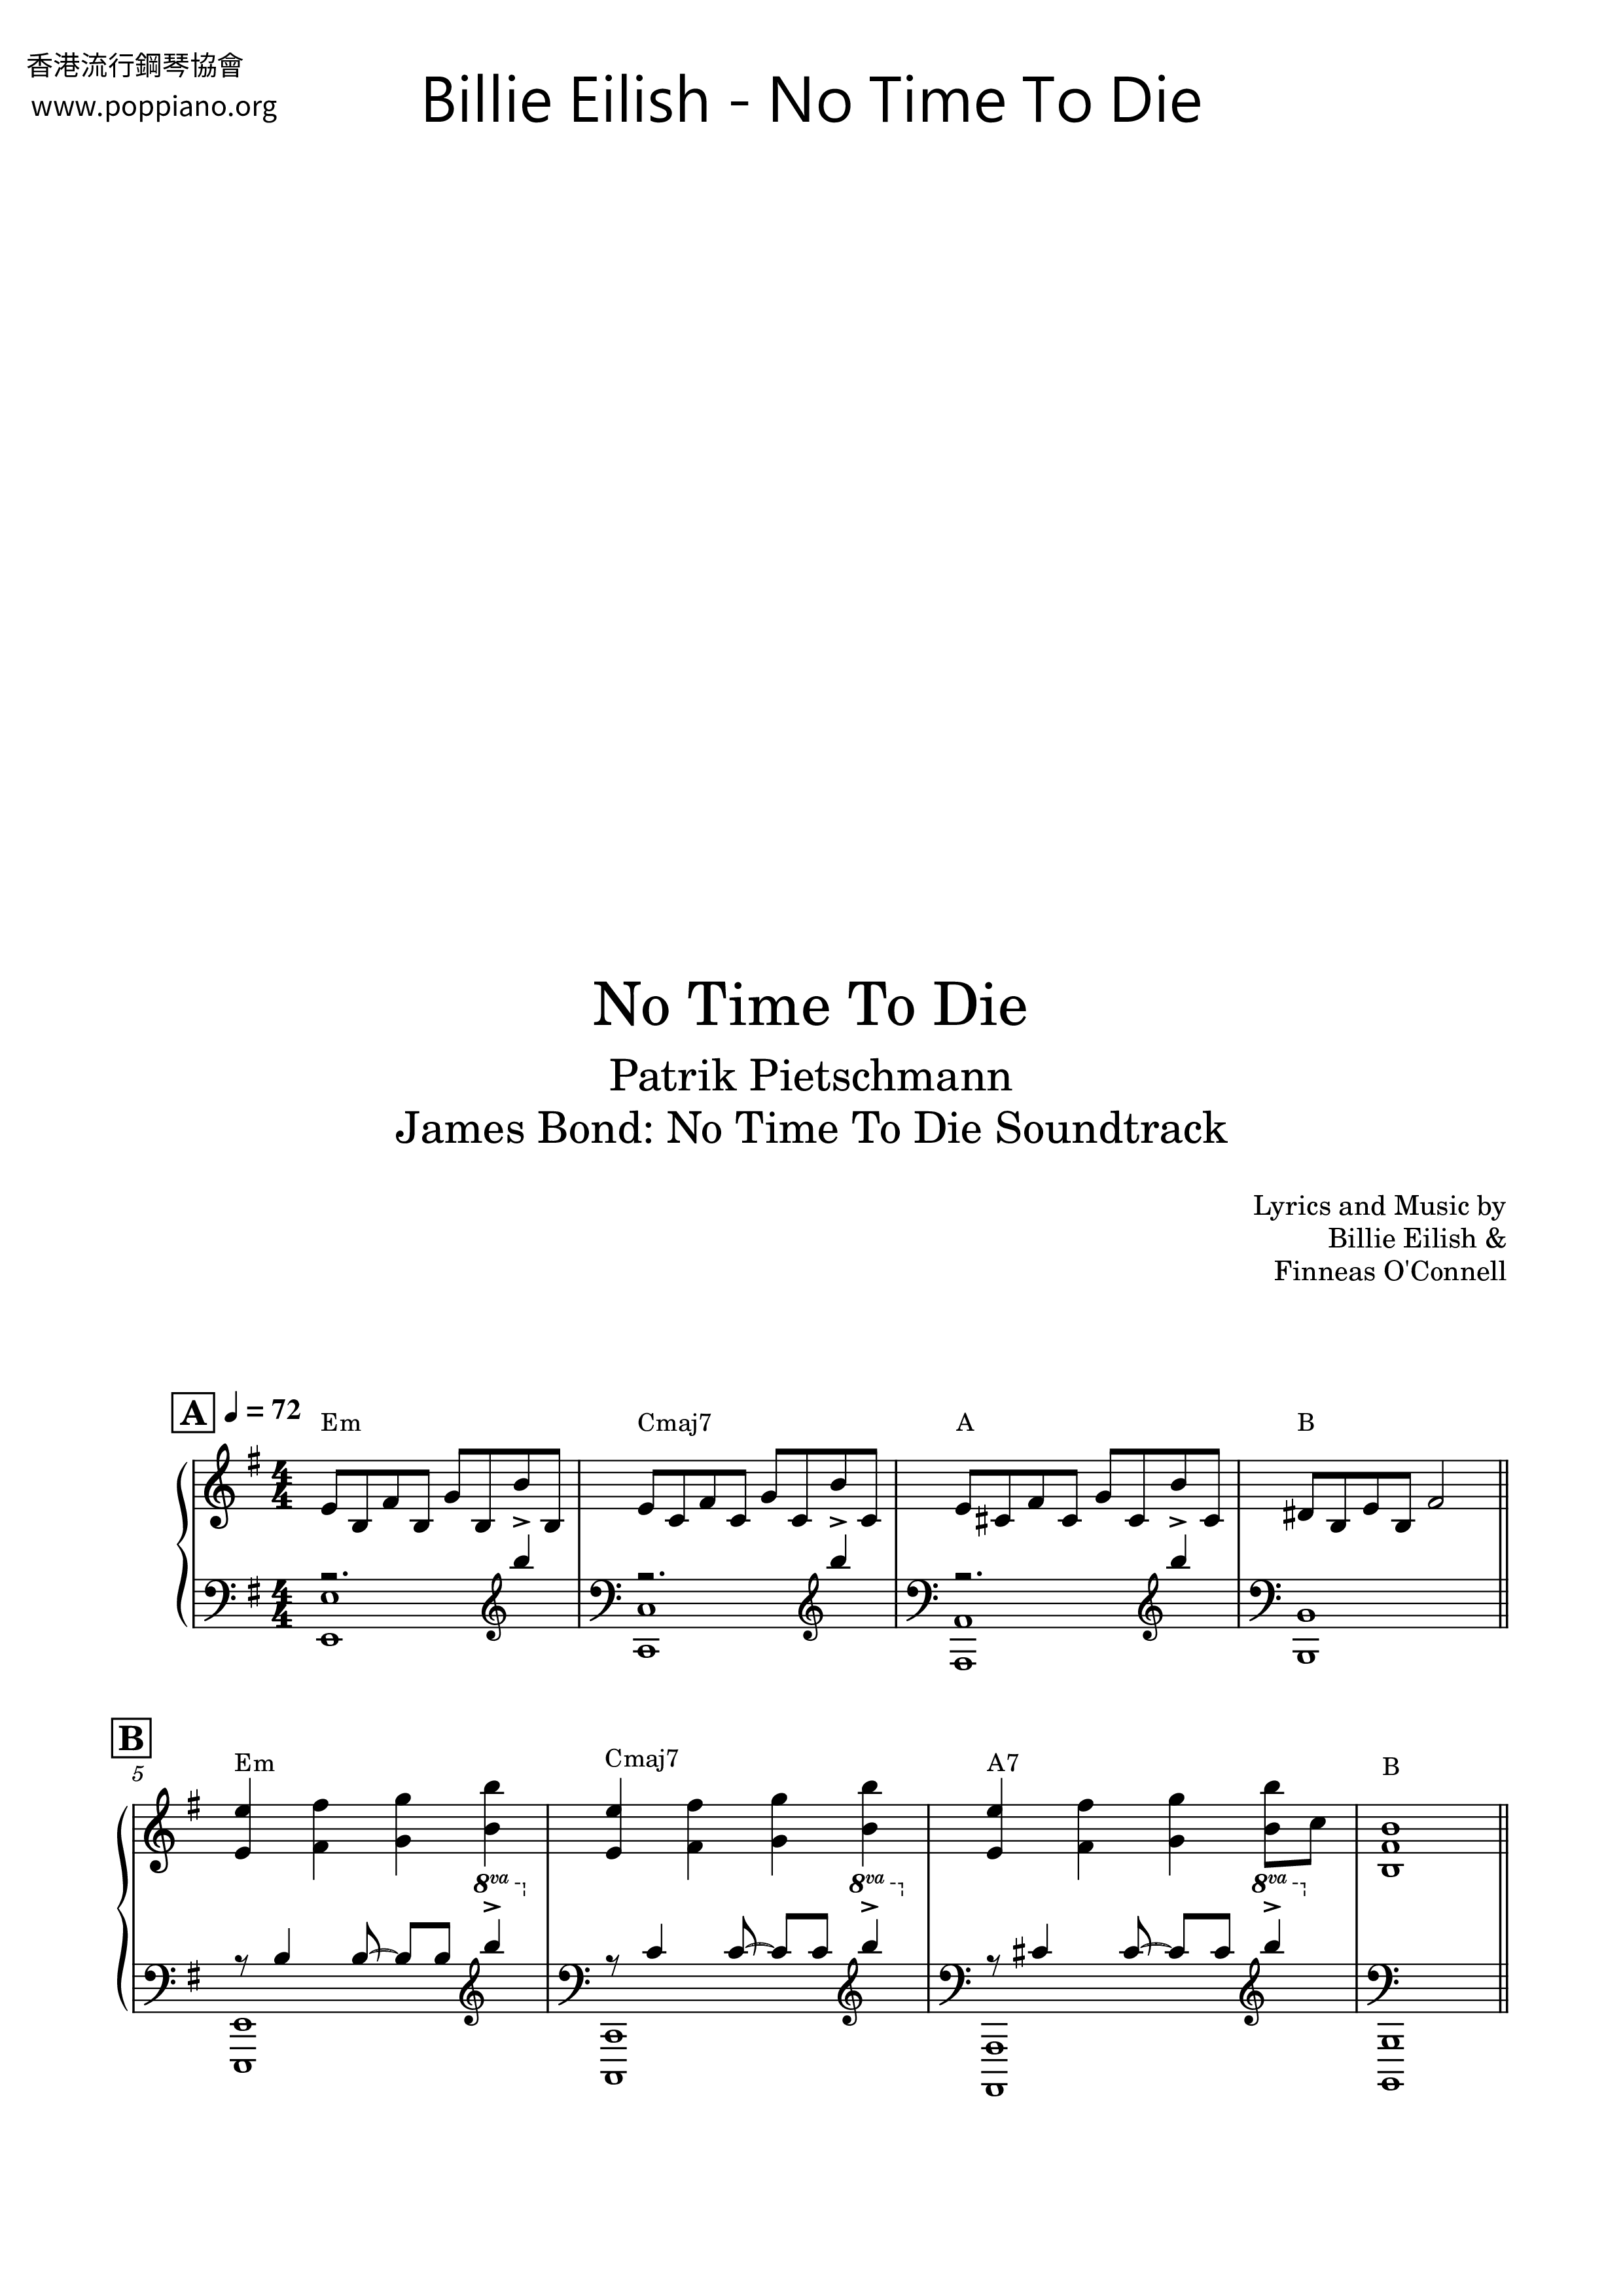 No Time To Die Score